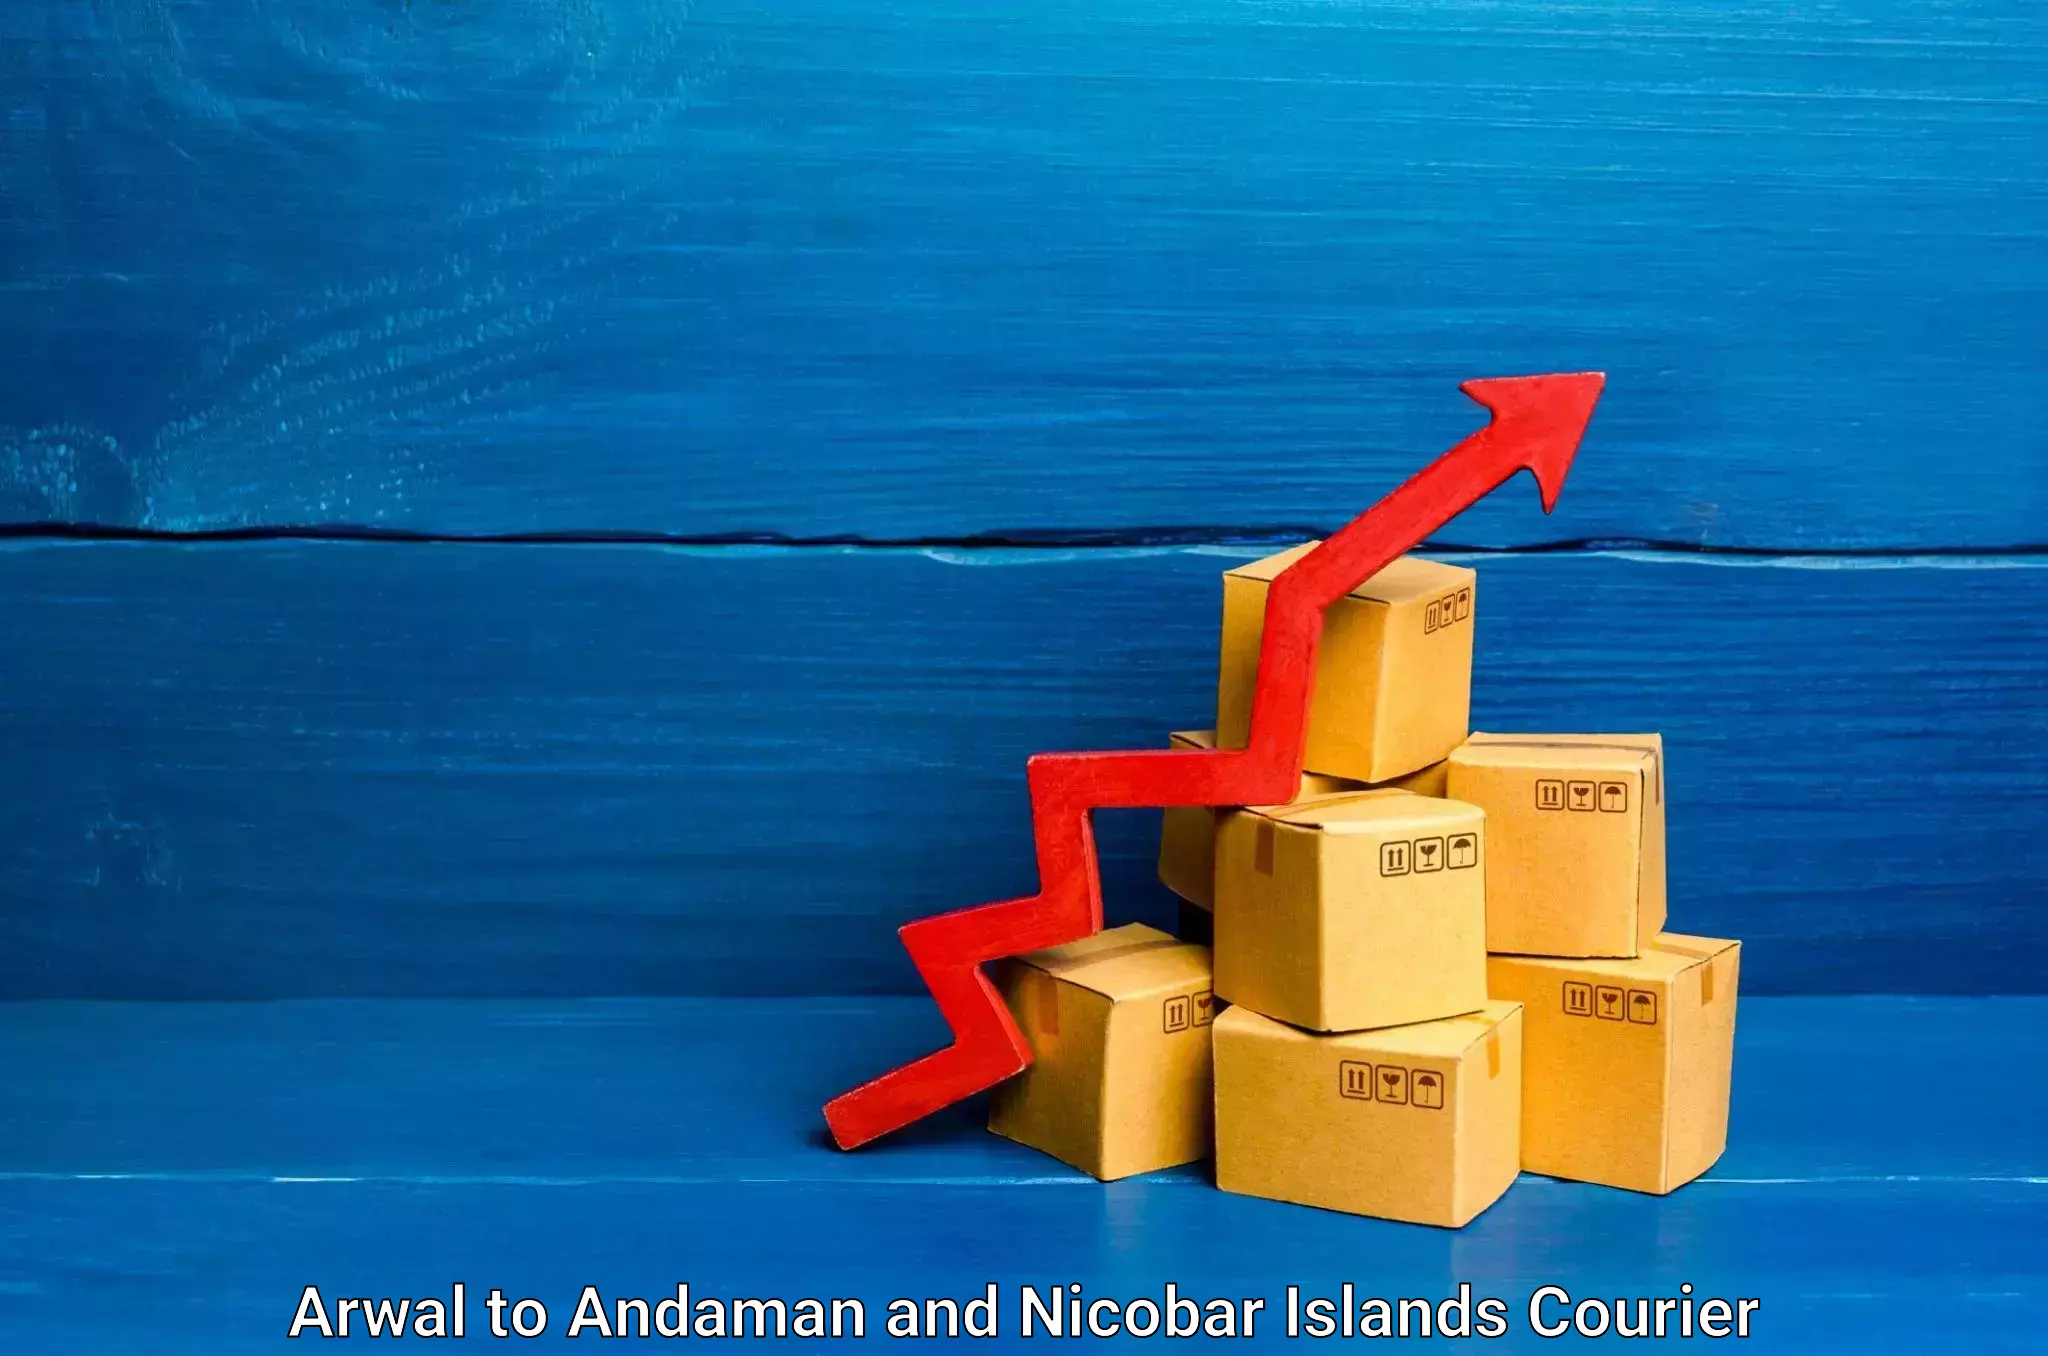 Furniture moving plans in Arwal to Andaman and Nicobar Islands